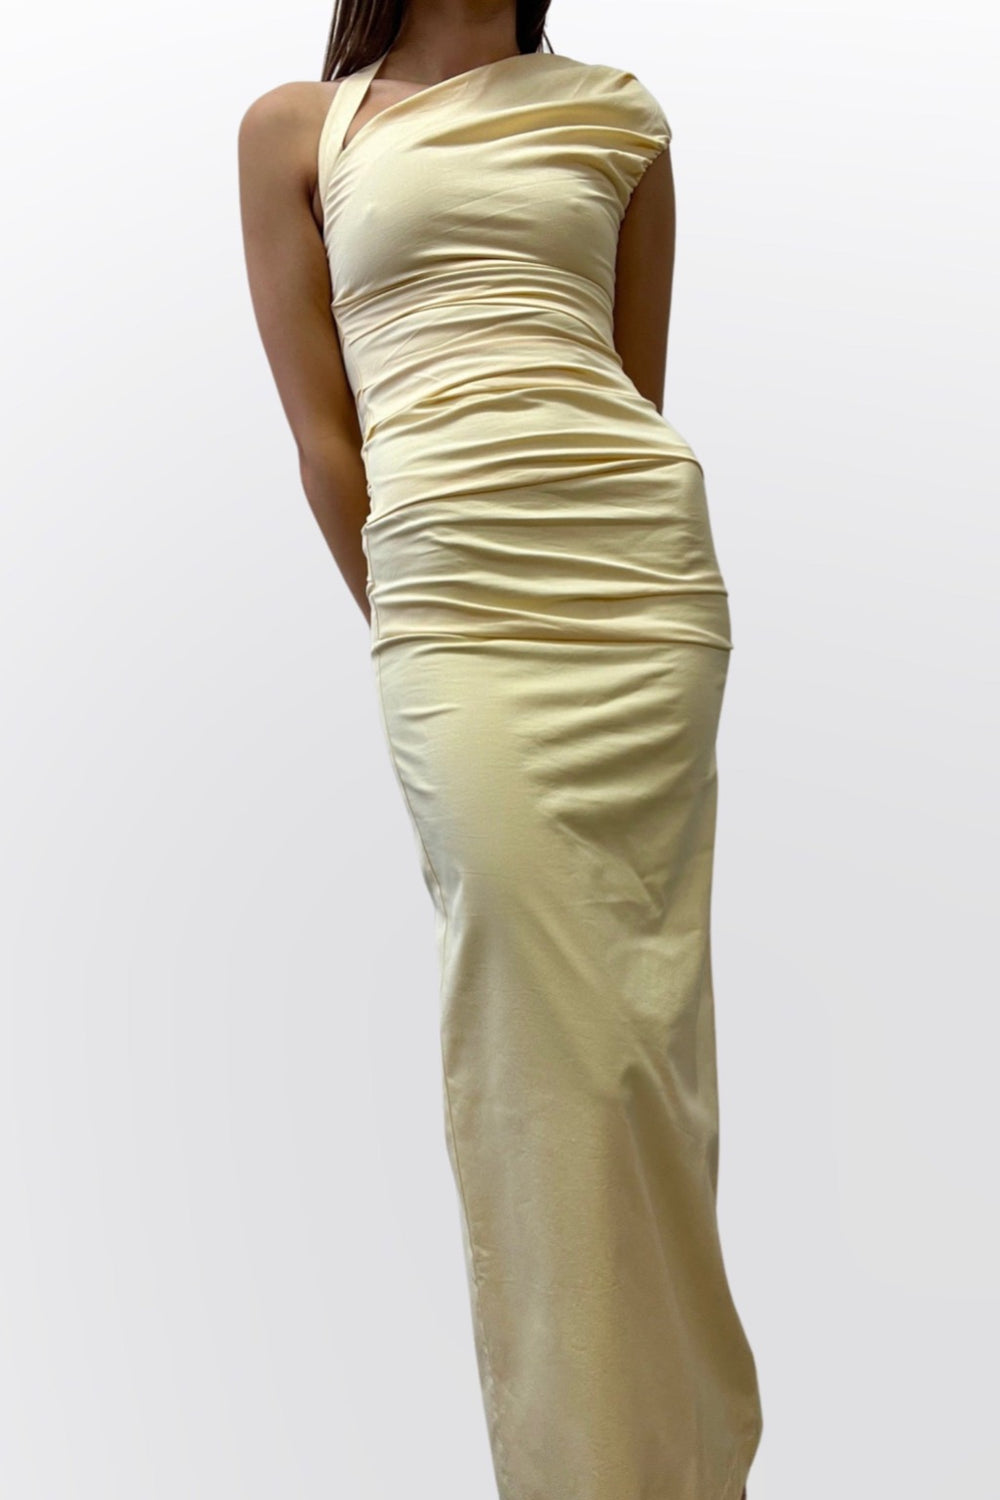 GIACOMO GATHERED GOWN (BUTTER)